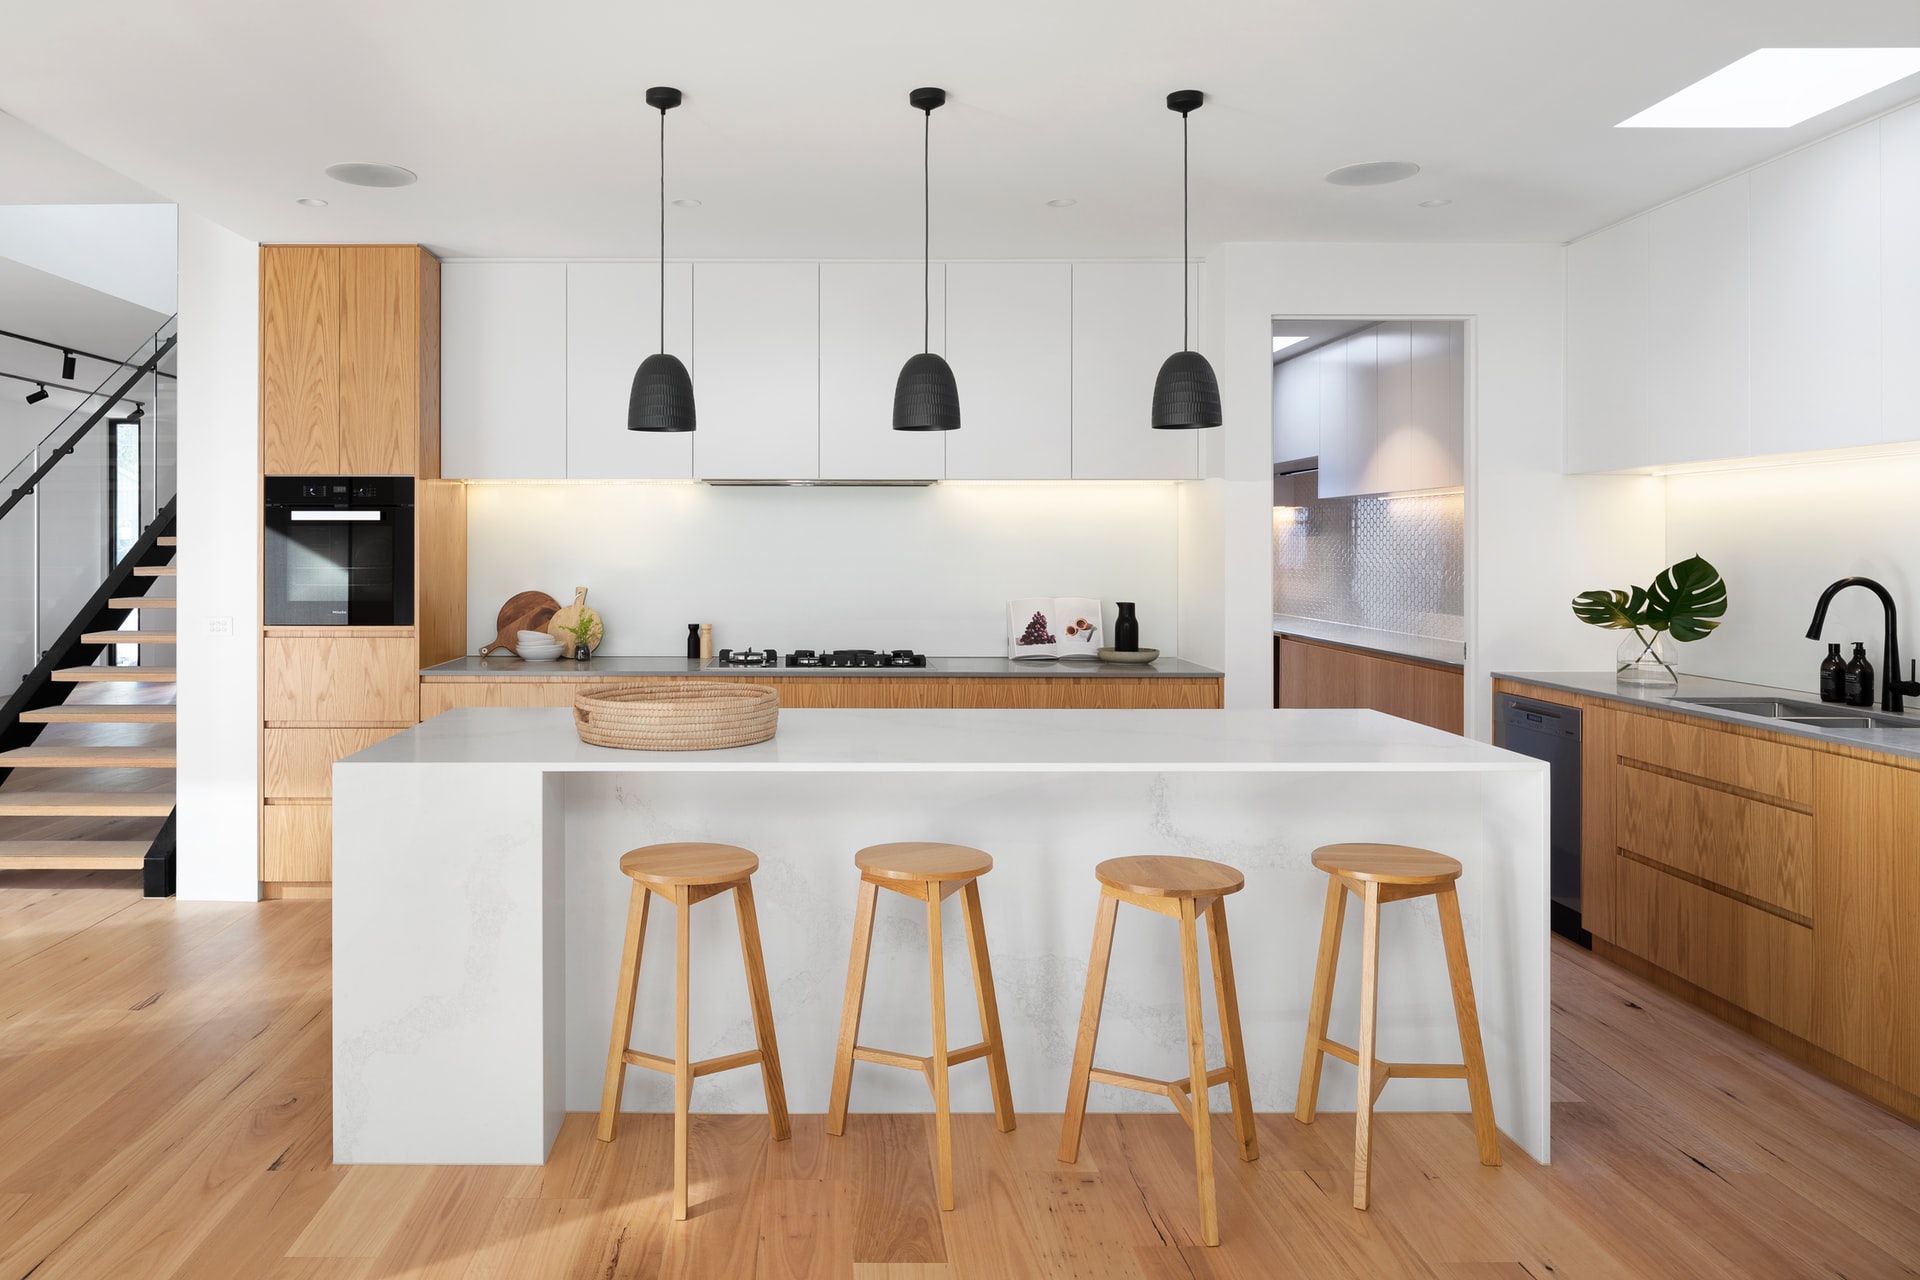 Kitchen with pale wood stools and hard wood flooring